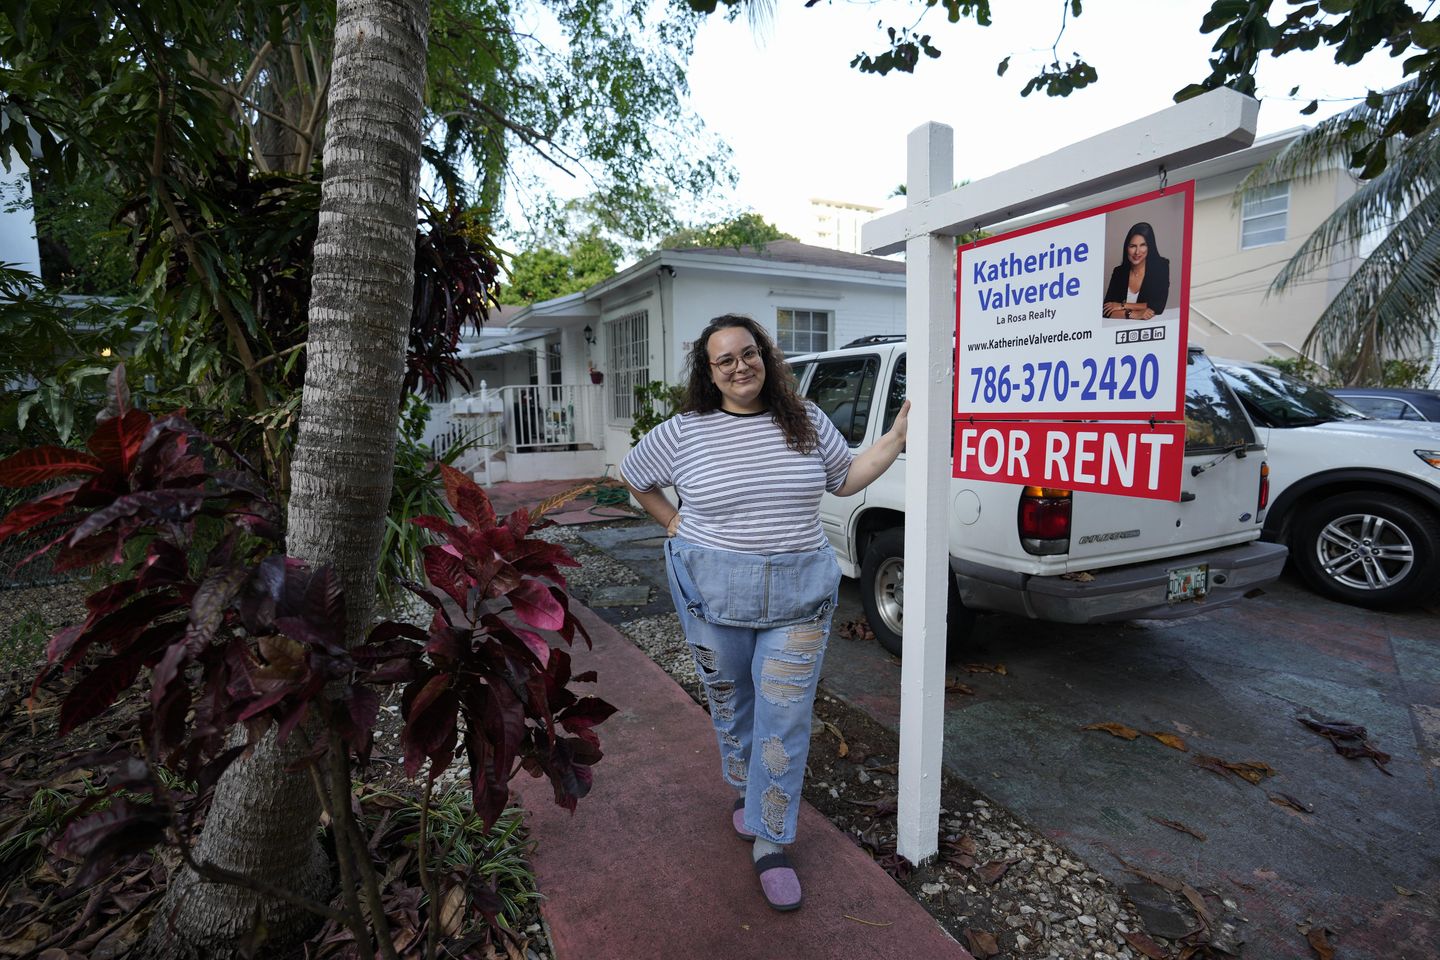 Rents reach insane levels across U.S. with no end in sight